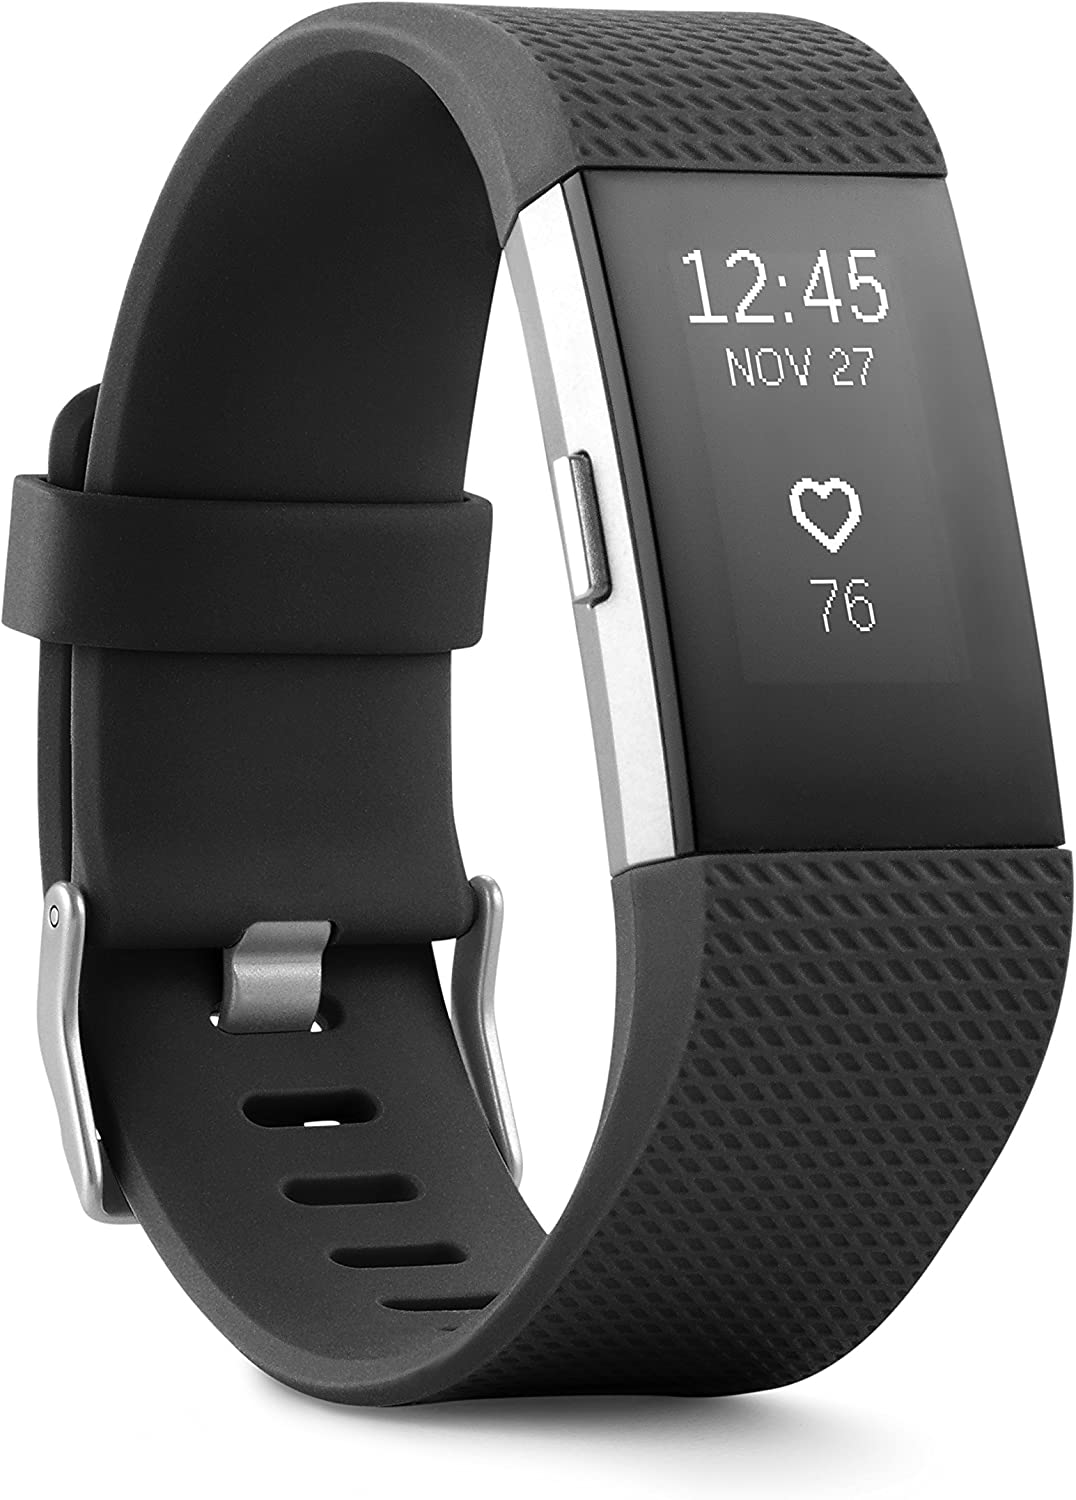 Fitbit Charge 2 Heart Rate + Fitness Wristband, Black, [...]